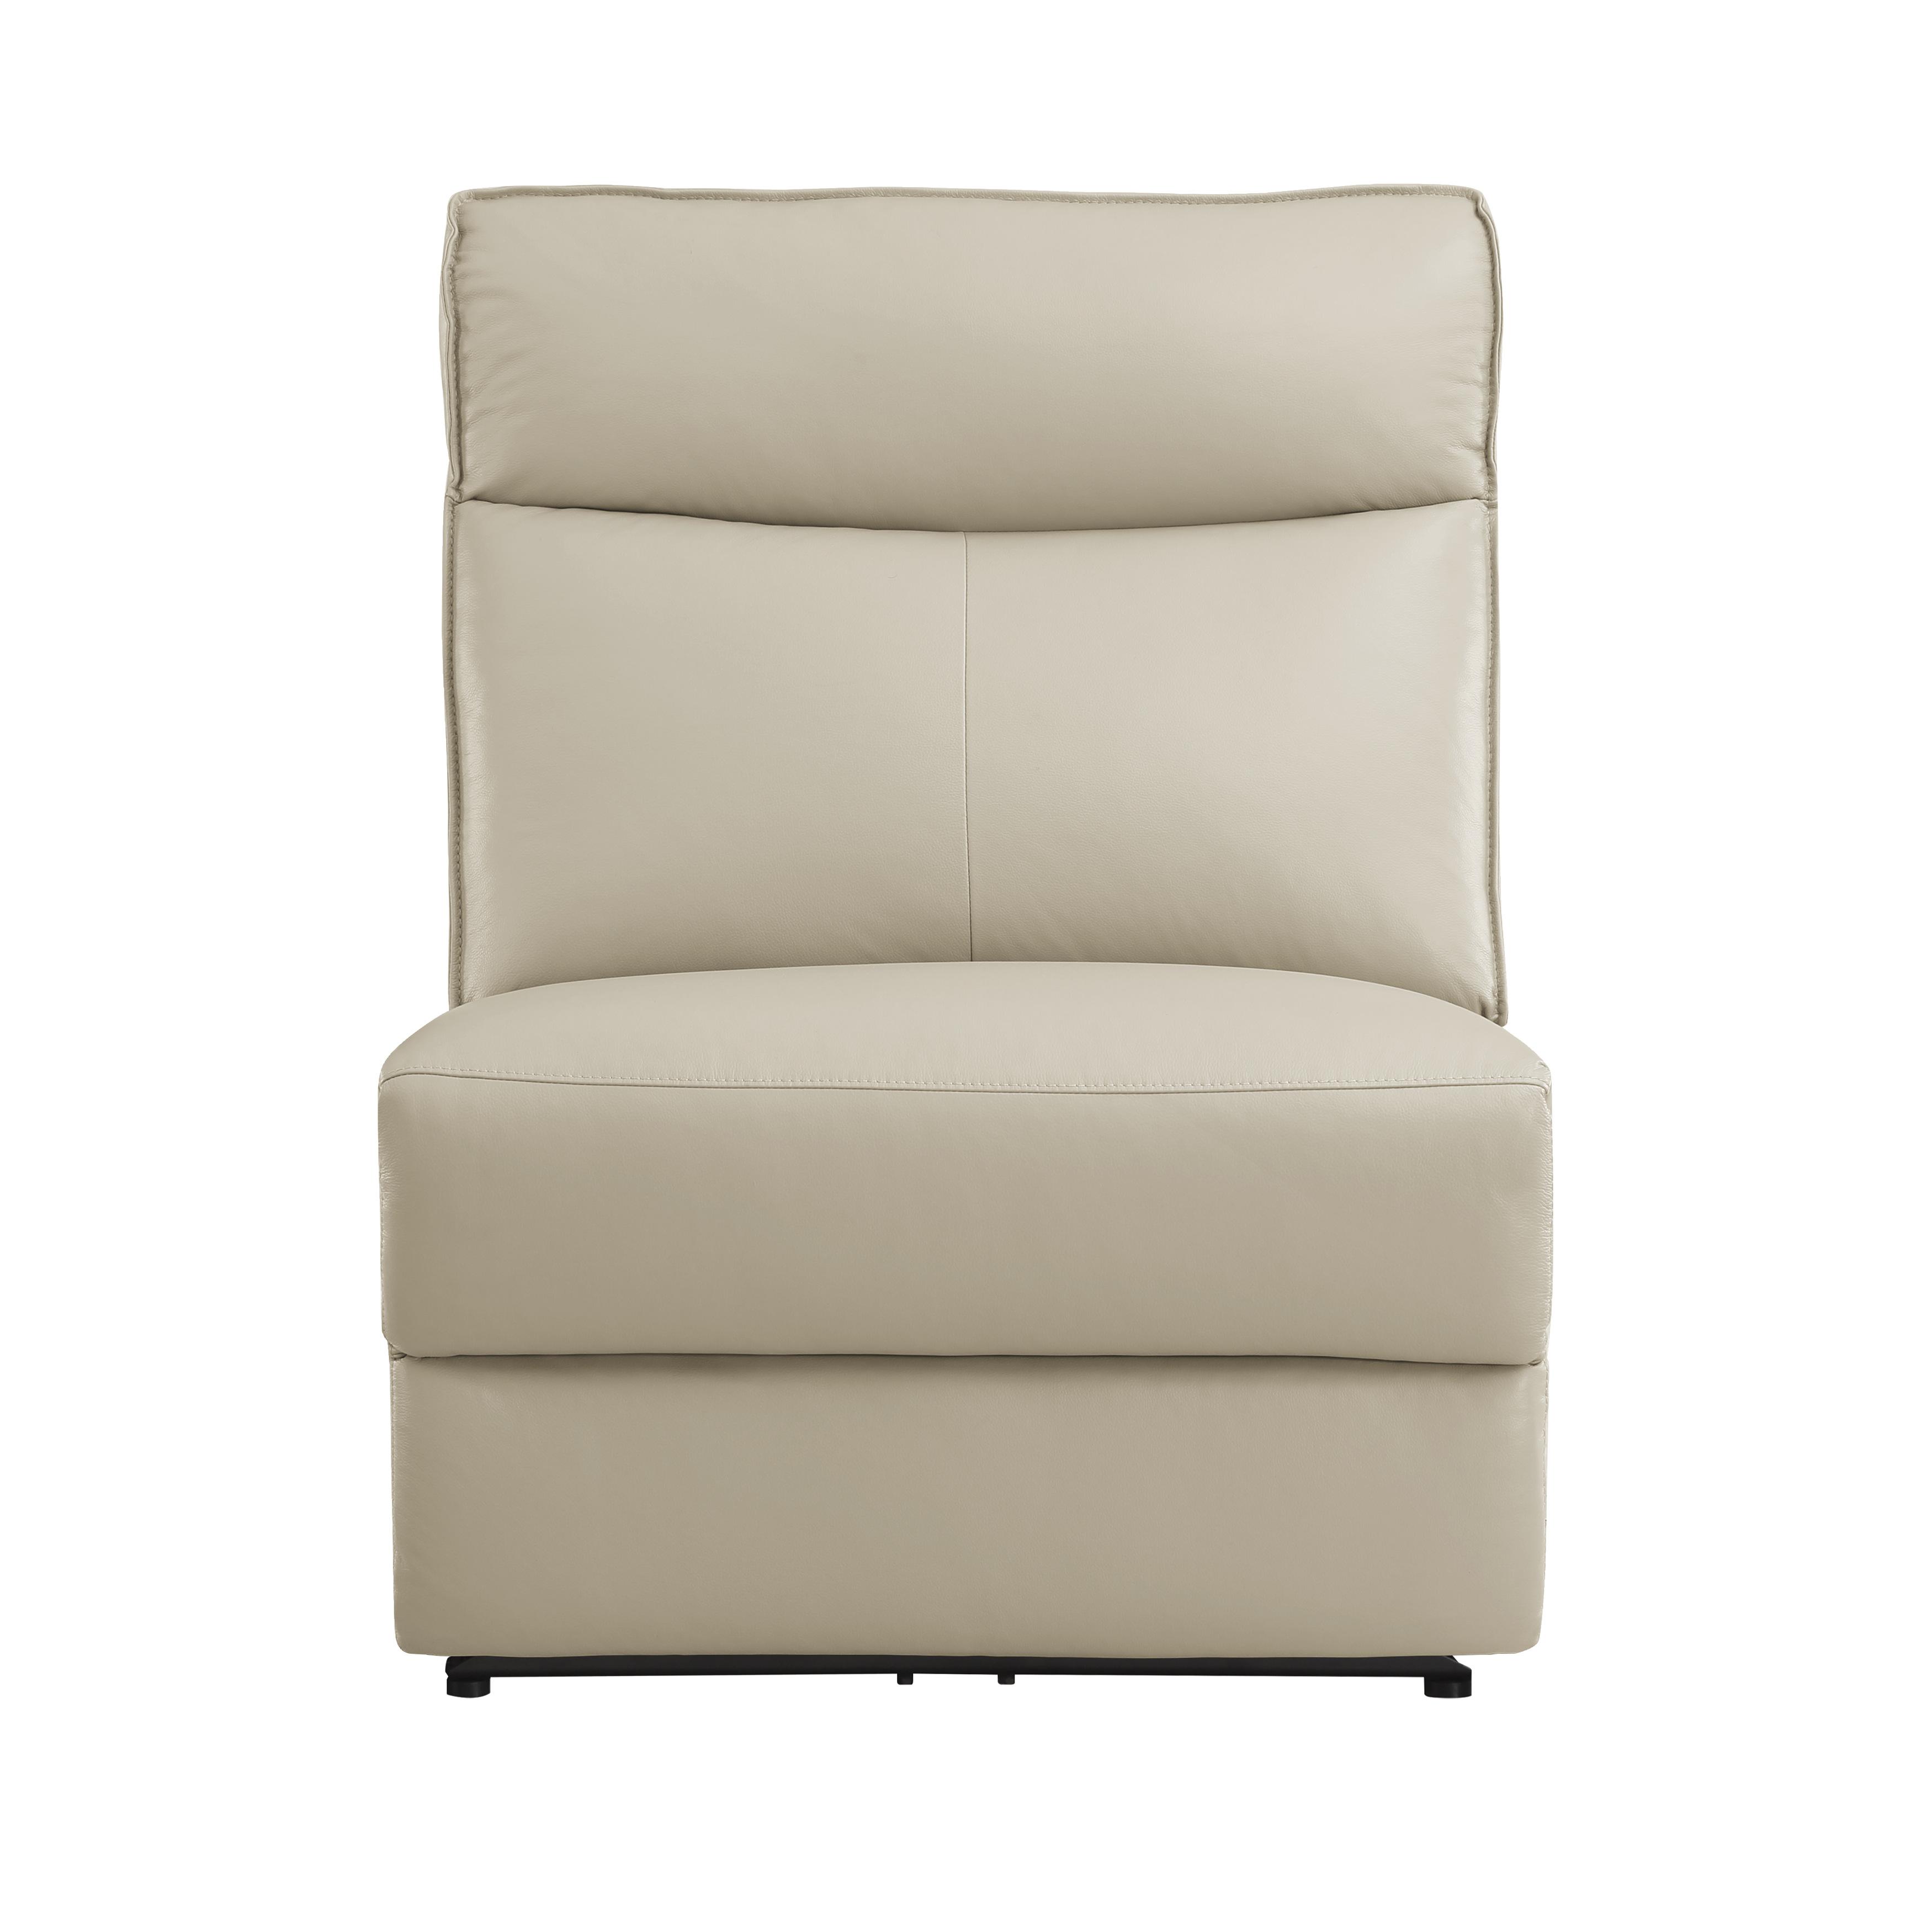 Classic Power Armless Recliner Chair 8259RFTP-ARPWH Maroni 8259RFTP-ARPWH in Taupe Leather